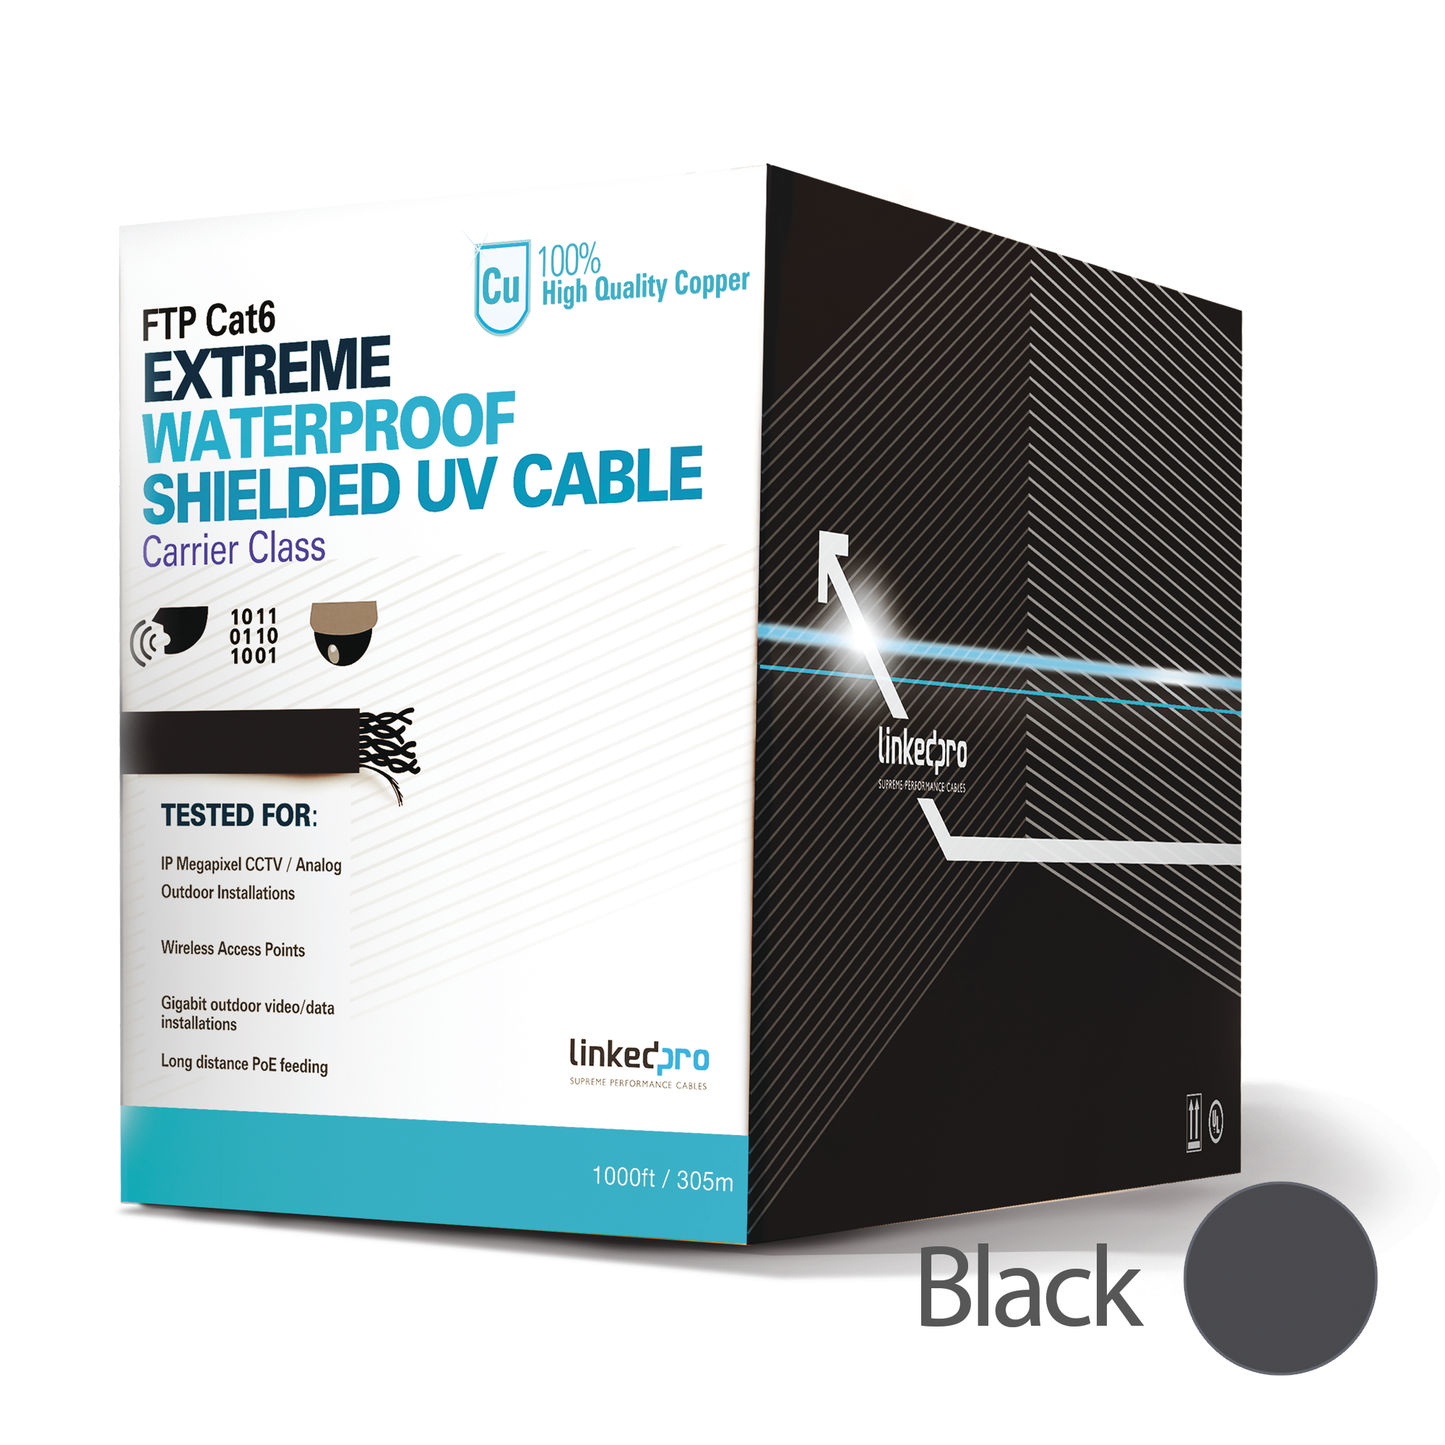 1000 ft (305 m) Cable Coil Cat6 Exterior Shielded Type FTP for Extreme Climates, UL, Black Color for Video Surveillance Applications, HD Video and Data Networks. Outdoor Use